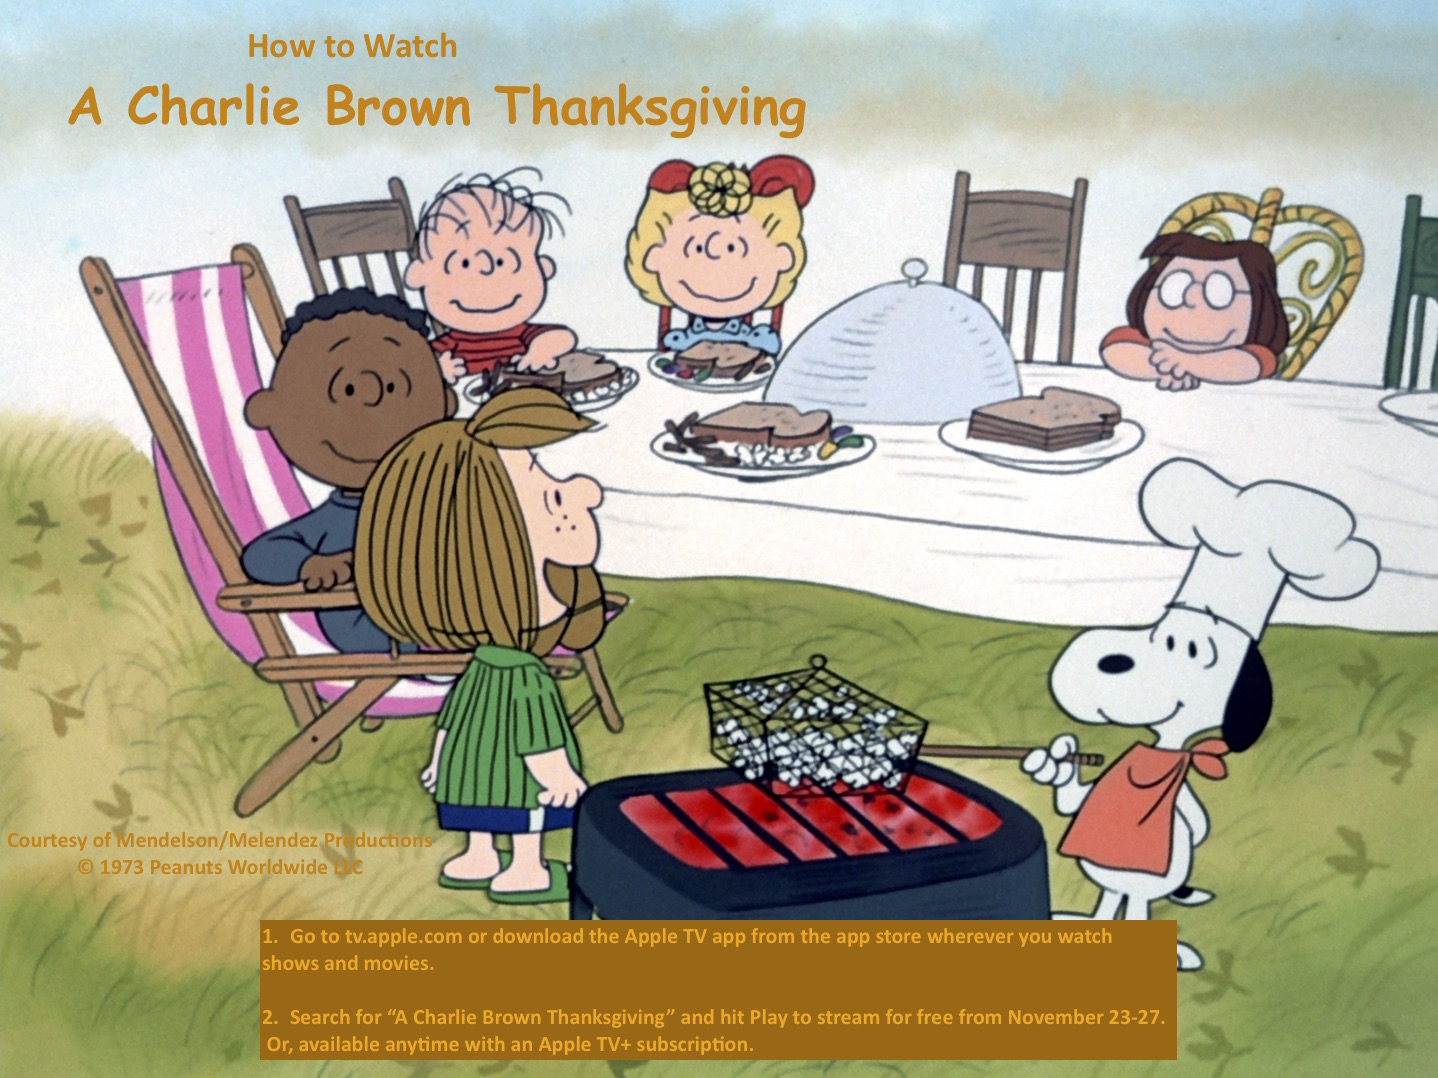 How to Watch "A Charlie Brown Thanksgiving"